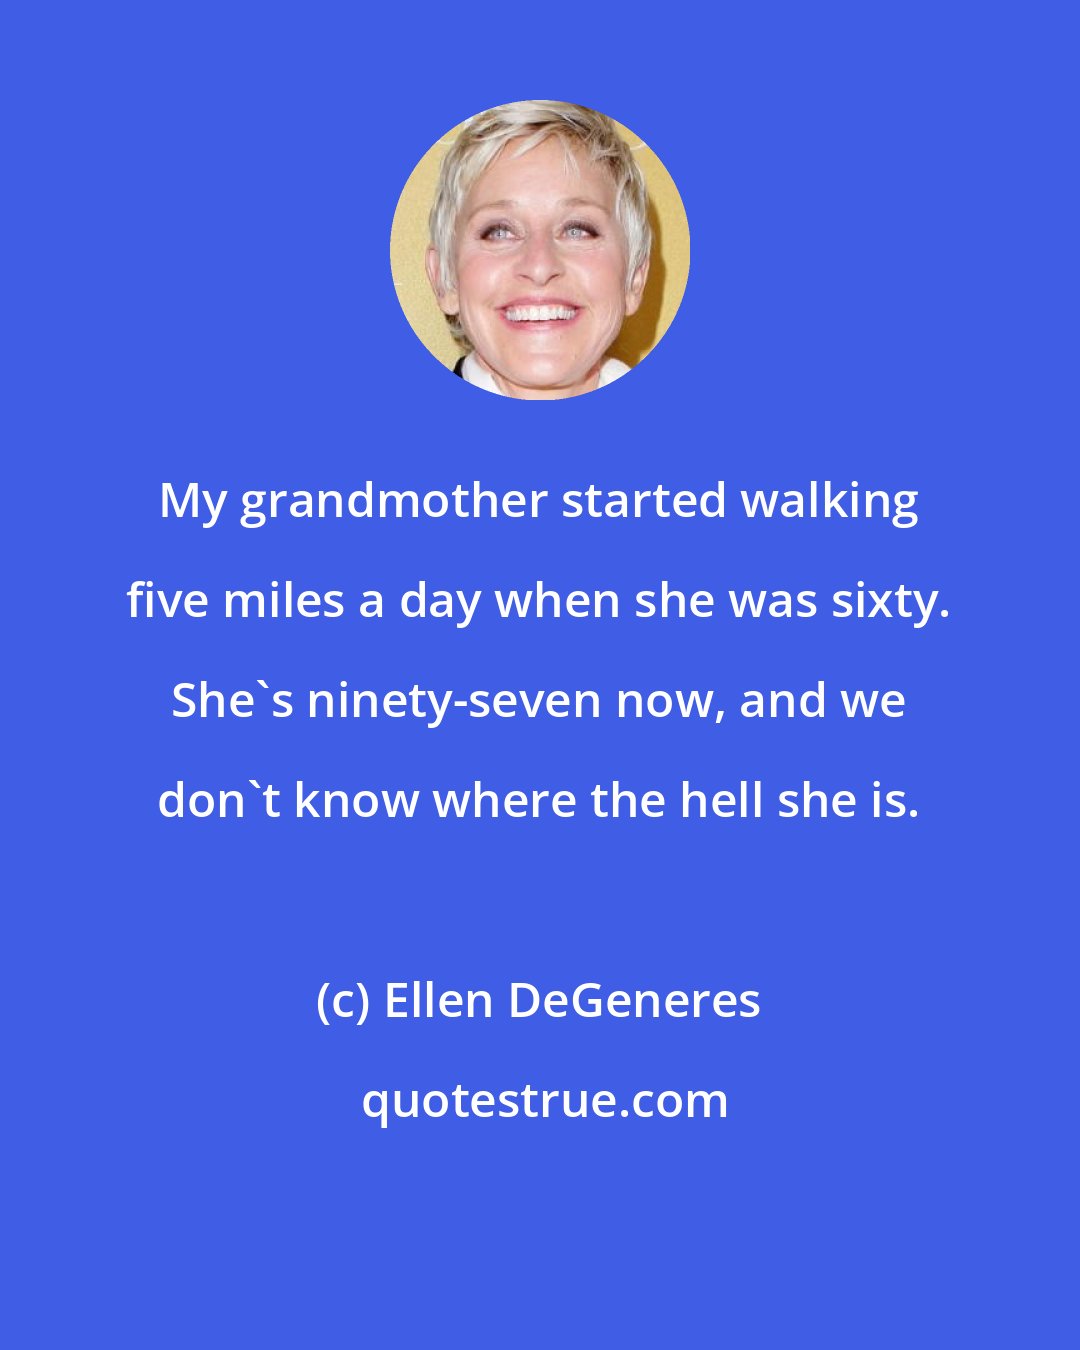 Ellen DeGeneres: My grandmother started walking five miles a day when she was sixty. She's ninety-seven now, and we don't know where the hell she is.